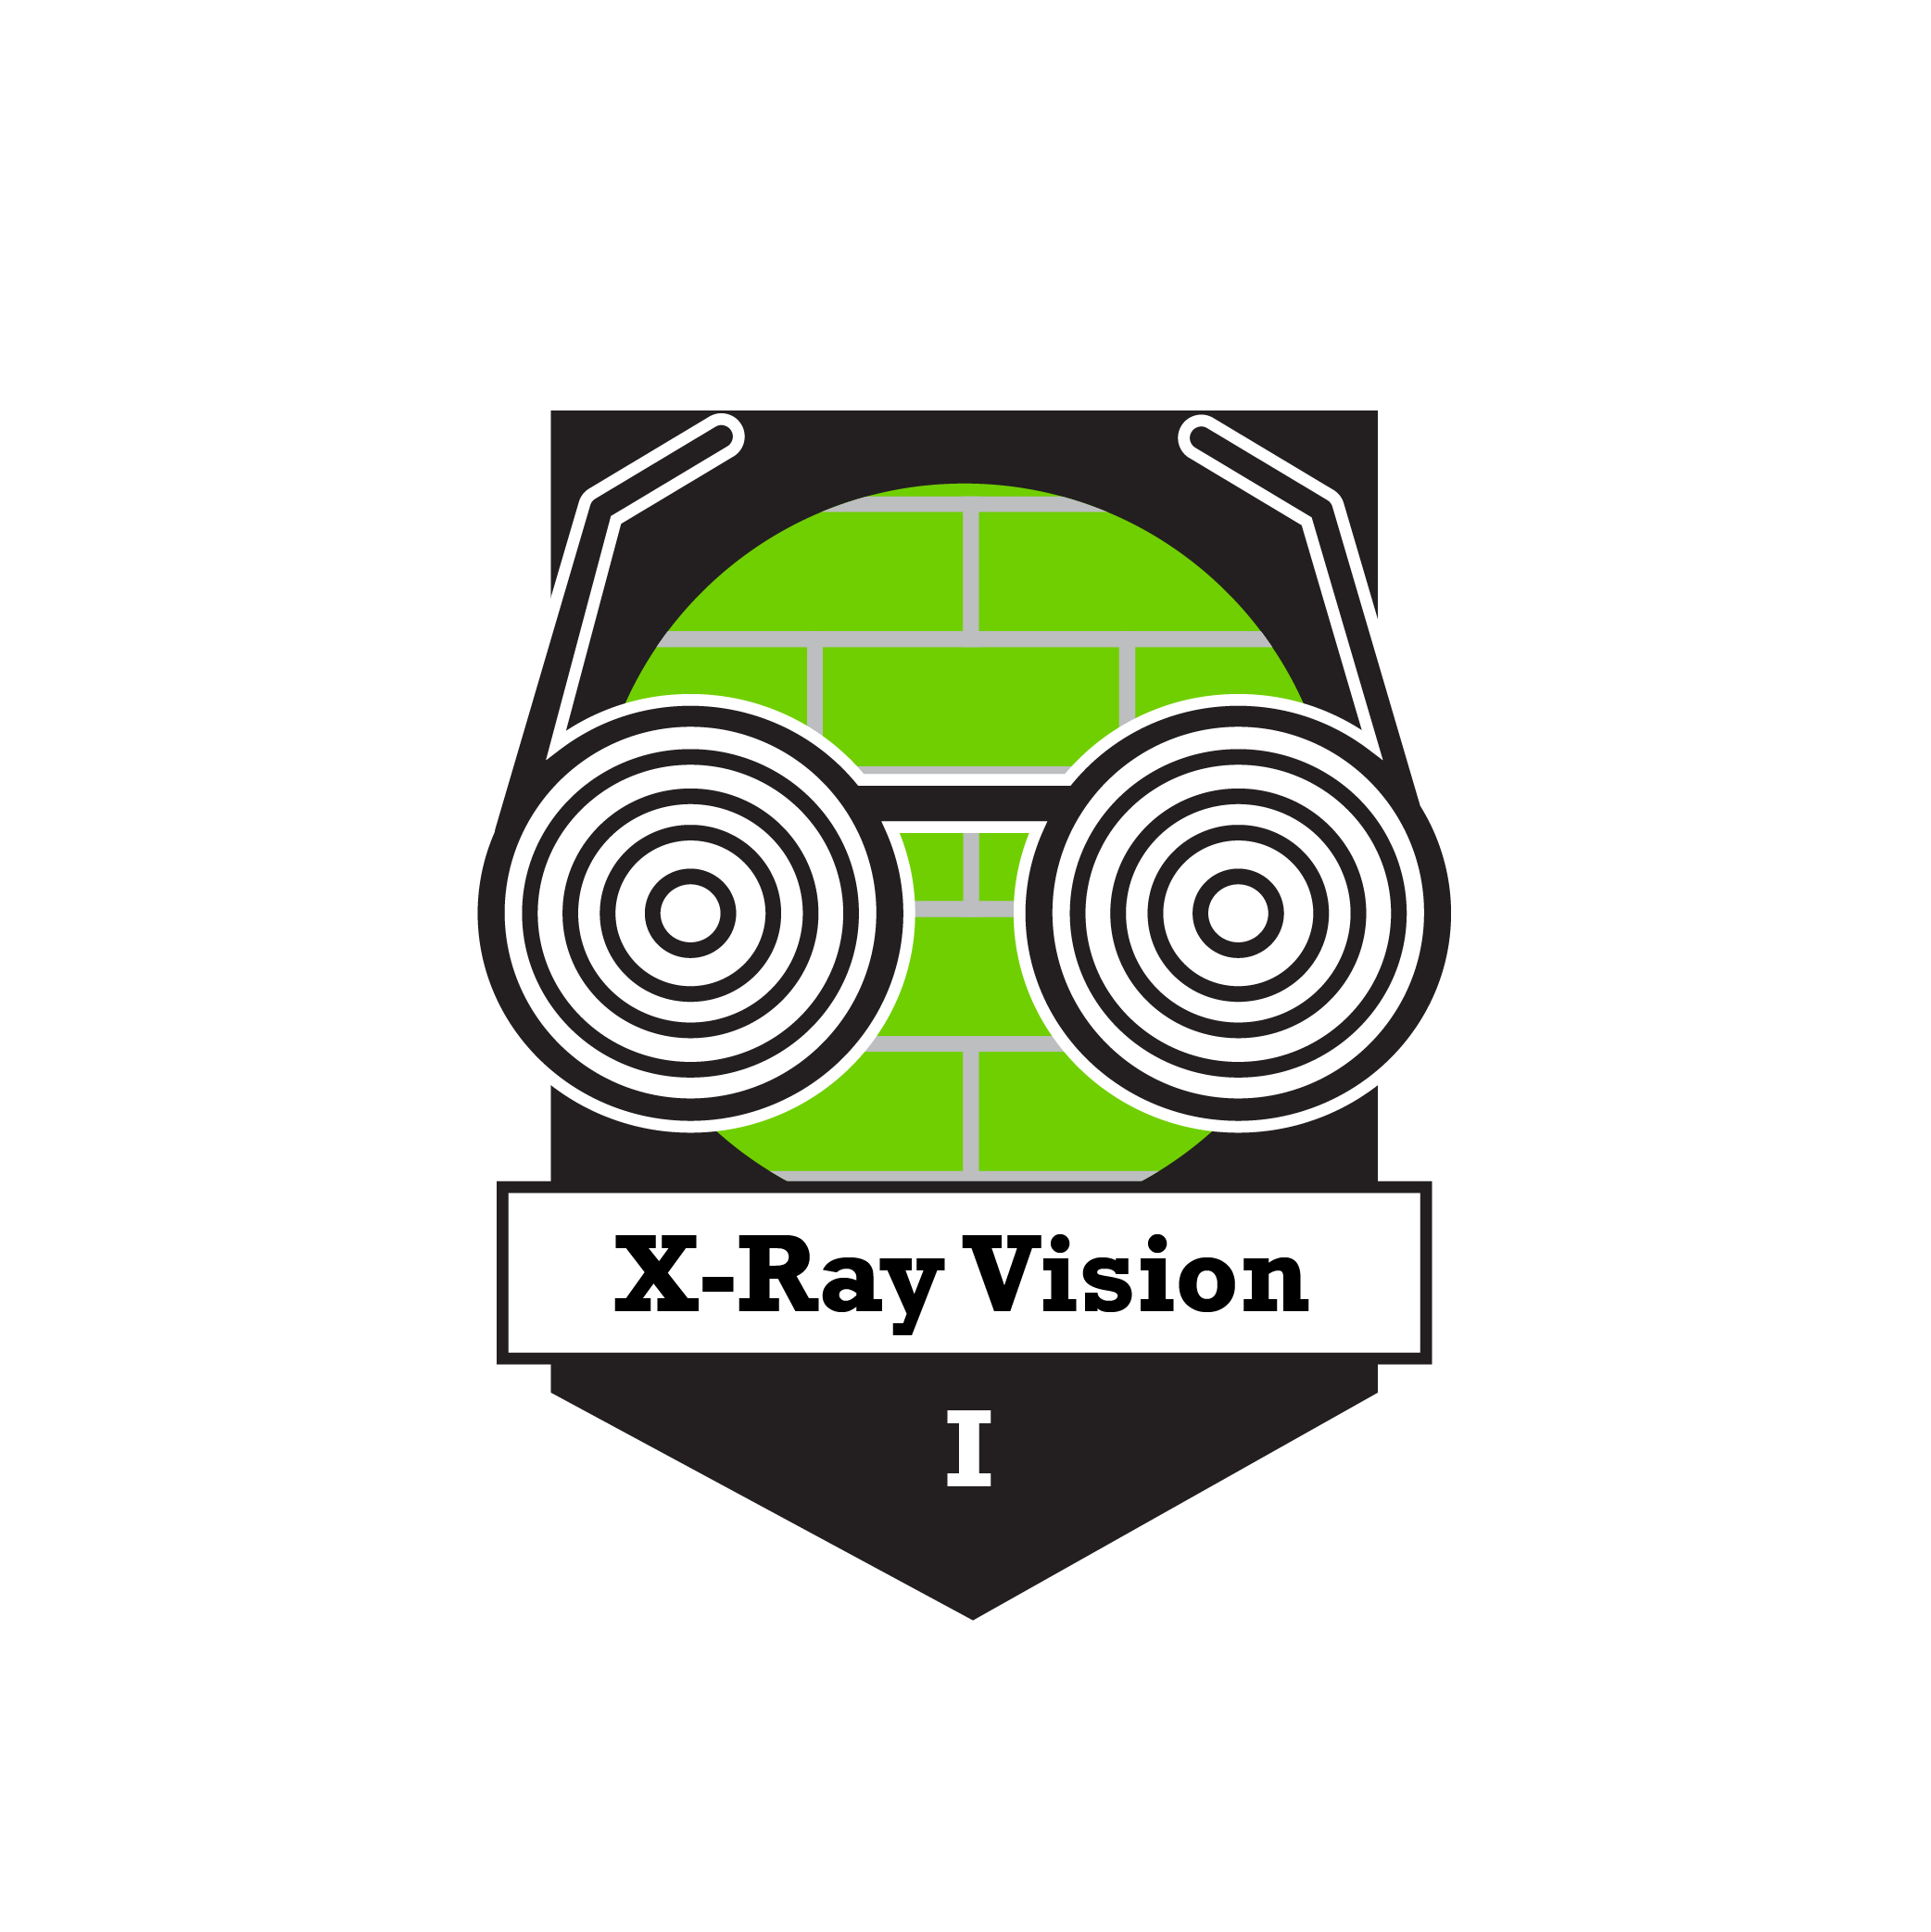 X-Ray Vision badge has a face with glasses and black and white spirals for lenses